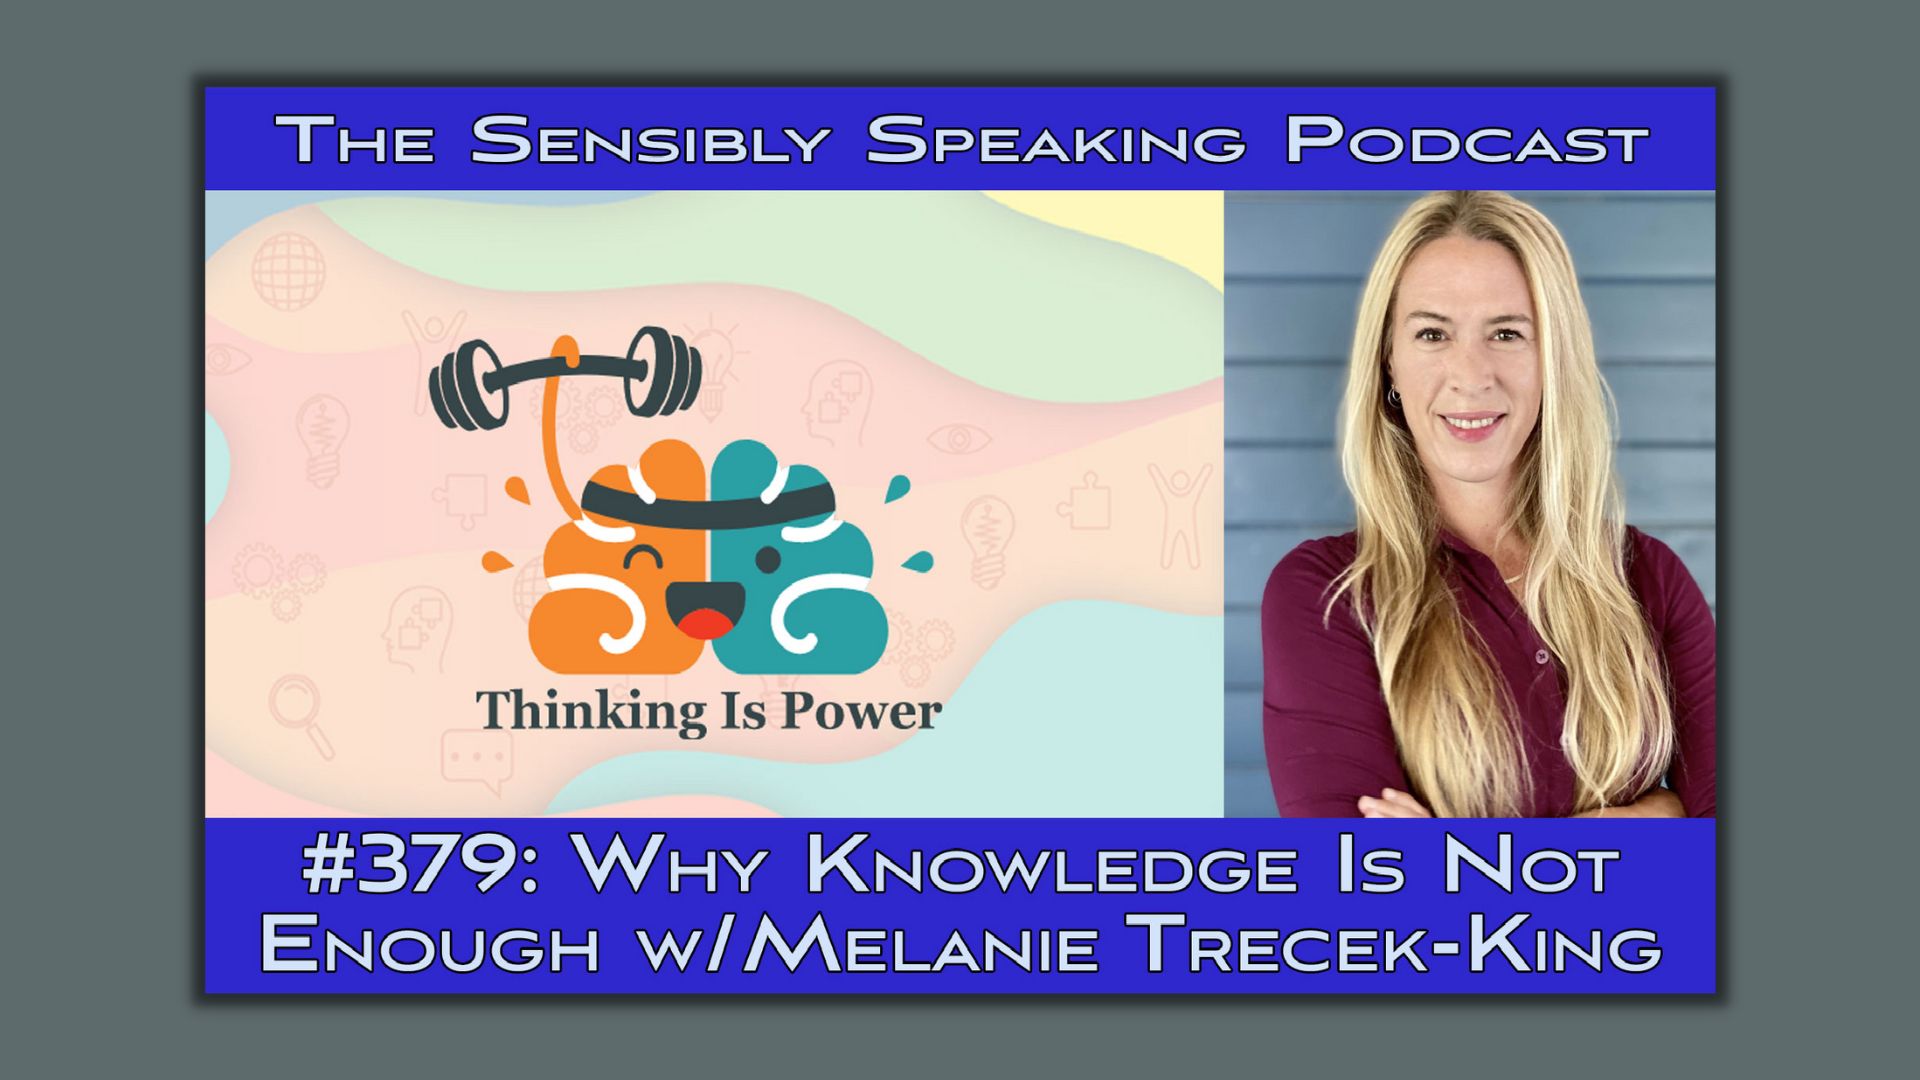 Melanie Trecek-King from Thinking Is Power on the Sensibly Speaking Podcast with Chris Shelton. Episode 379: Why knowledge is not enough.